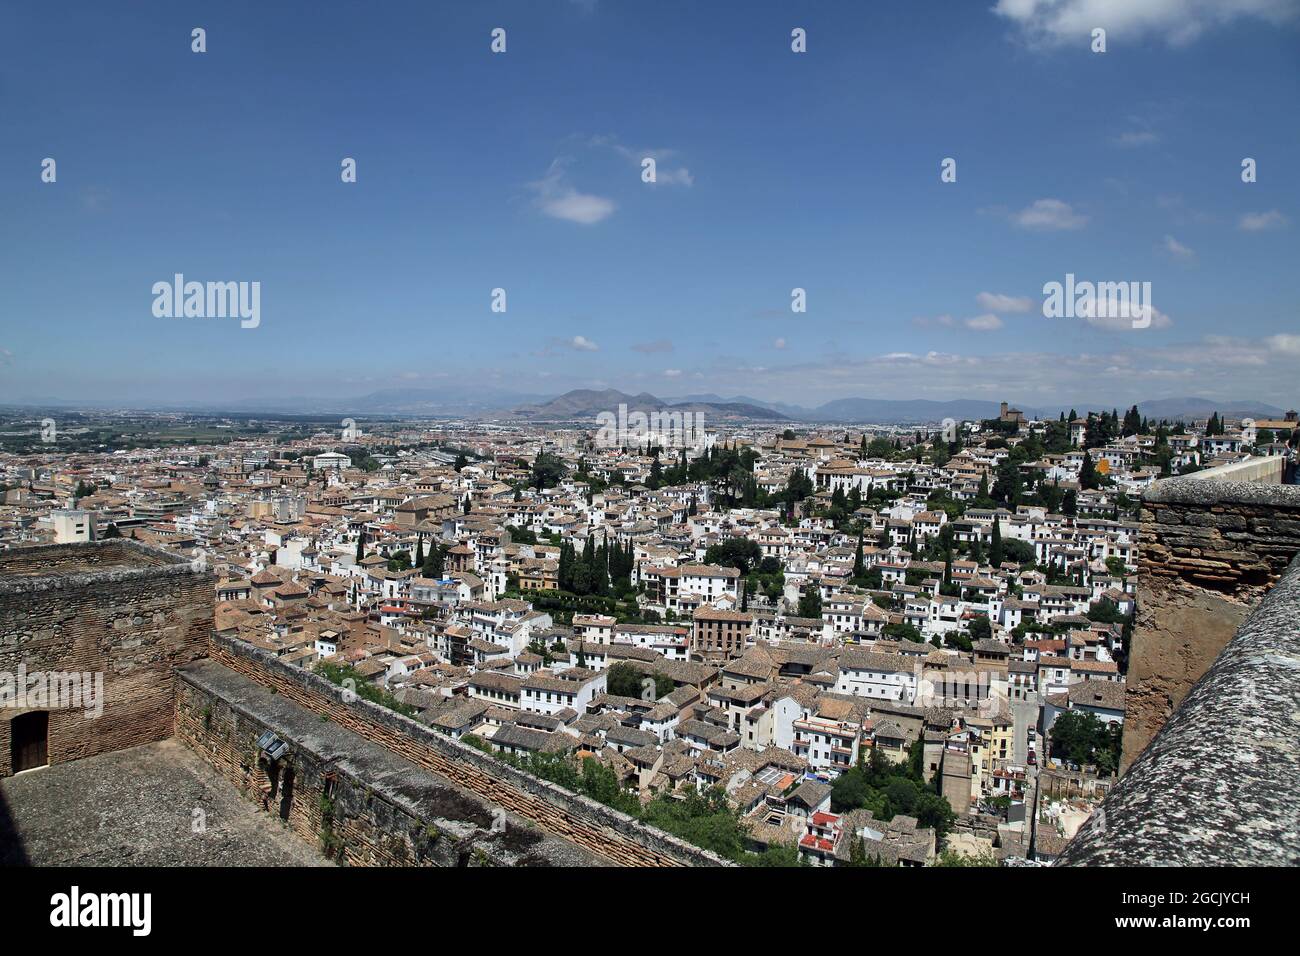 the Alhambra in Granada.On top of the hill al-Sabika,on the bank of the river Darro,Granada Spain.Constructed as a fortress in 889 CE.Rebuilt mid-13th century by Arab Nasrid emir Mohammed ben Al-Ahmar of the Emirate of Granada,After the Christian Reconquista in 1492,the site became the Royal Court of Ferdinand and Isabella Stock Photo